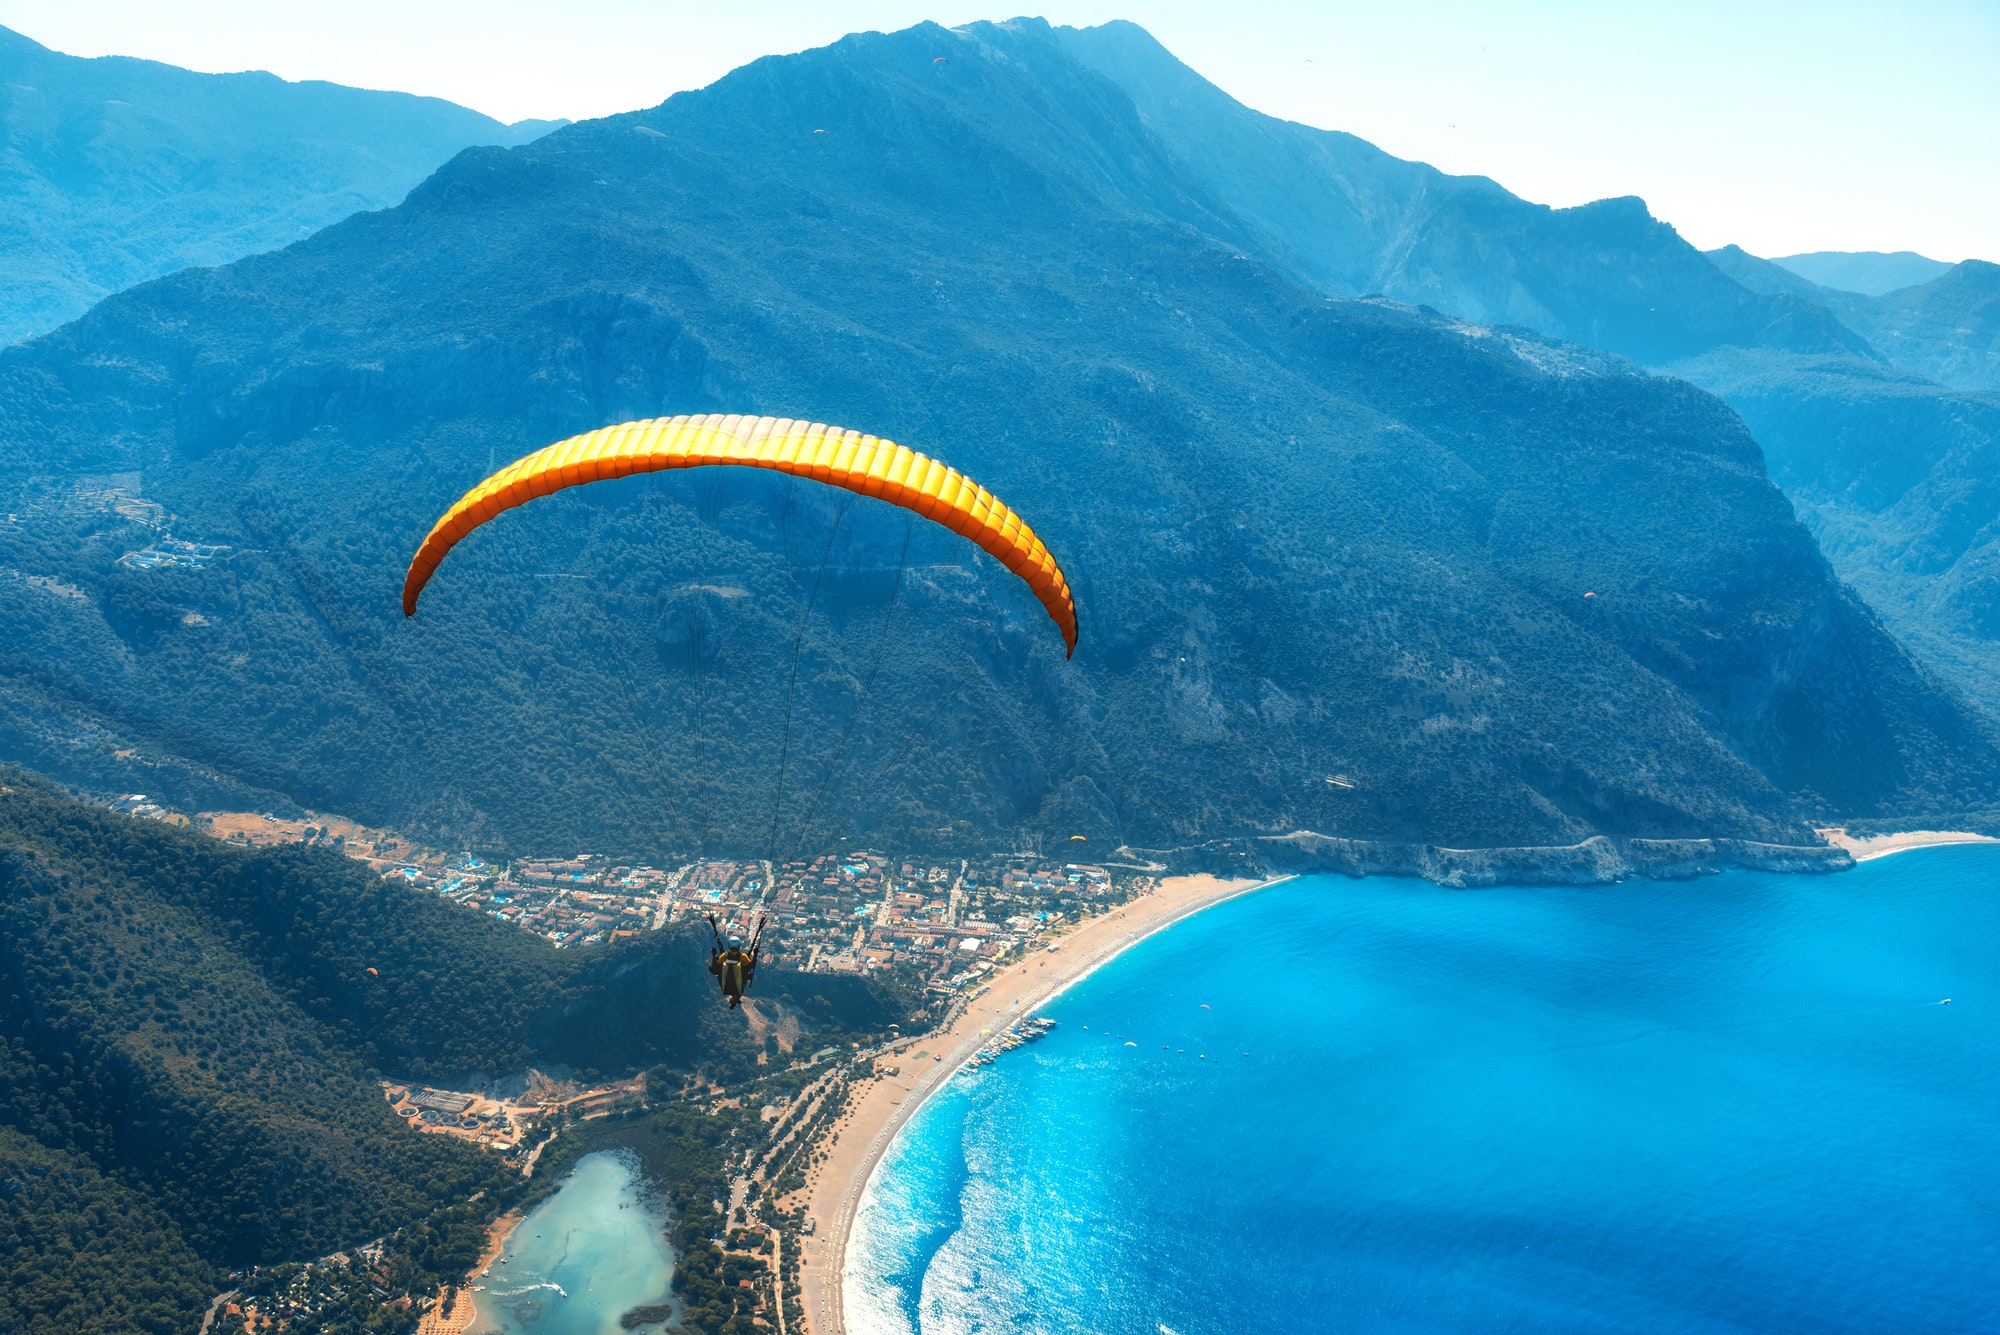 Paraglider tandem flying over the sea with blue water and mountains